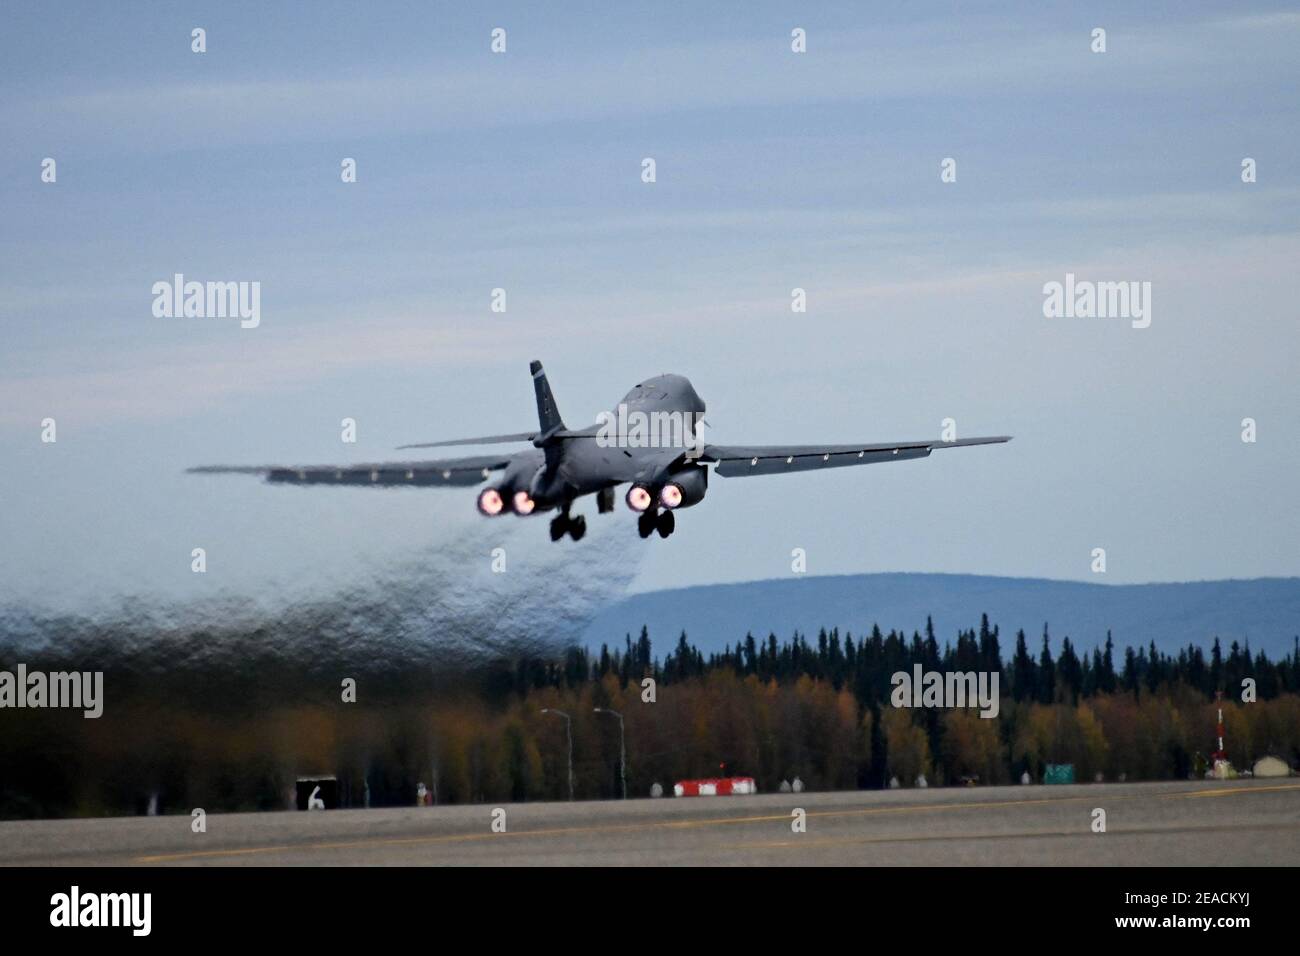 Handout file photo dated September 14, 2020 of aB-1 Lancer departs Eielson Air Force Base, Alaska, , on its way to Europe in support of a Bomber Task Force mission. The US Air Force is deploying B-1 bombers to Norway for the first time in a move that sends a clear message to Moscow that the US military will operate in the strategically important Arctic region and demonstrate that it will defend allies in the area against any Russian aggression close to the country's border. Four US Air Force B-1 bombers are being deployed to Orland Air Base in Norway, and within the next three weeks, missions Stock Photo